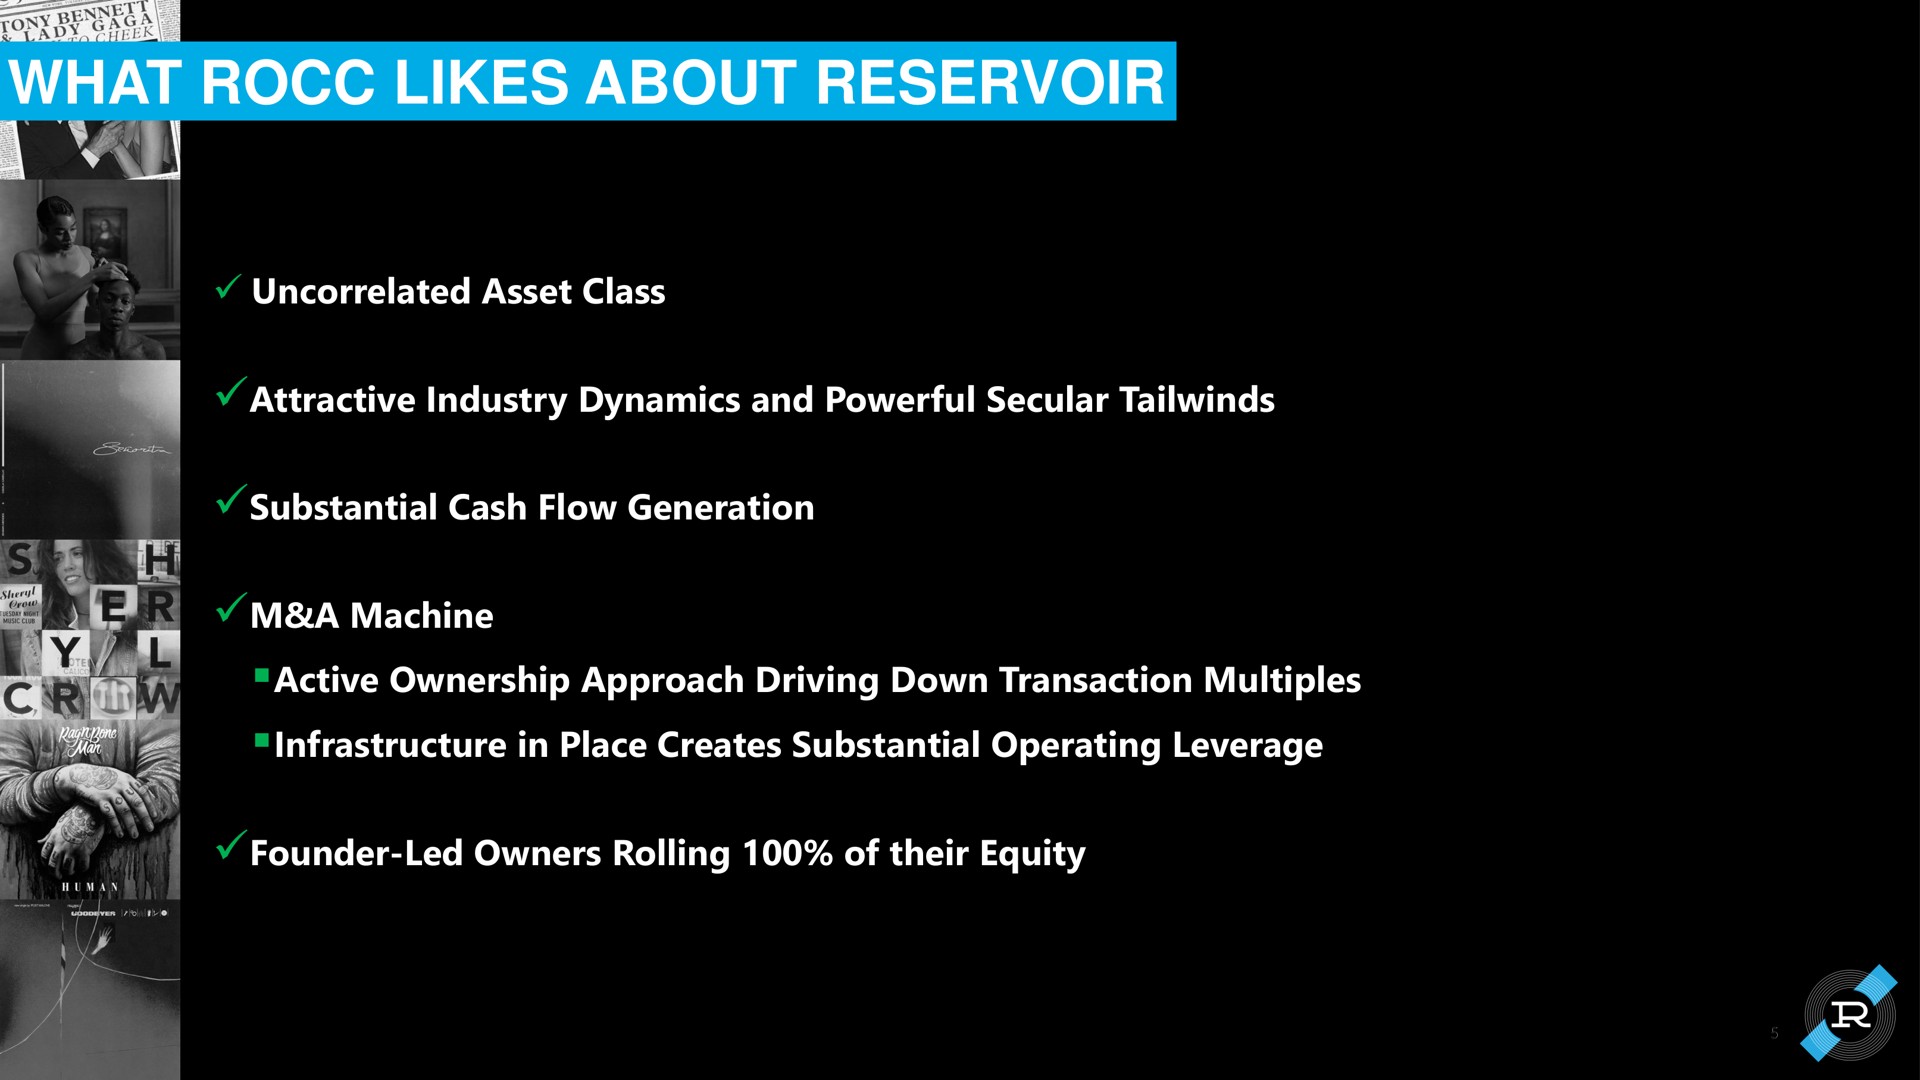 what likes about reservoir attractive industry dynamics and powerful secular active ownership approach driving down transaction multiples infrastructure in place creates substantial operating leverage he founder led owners rolling of their equity | Reservoir